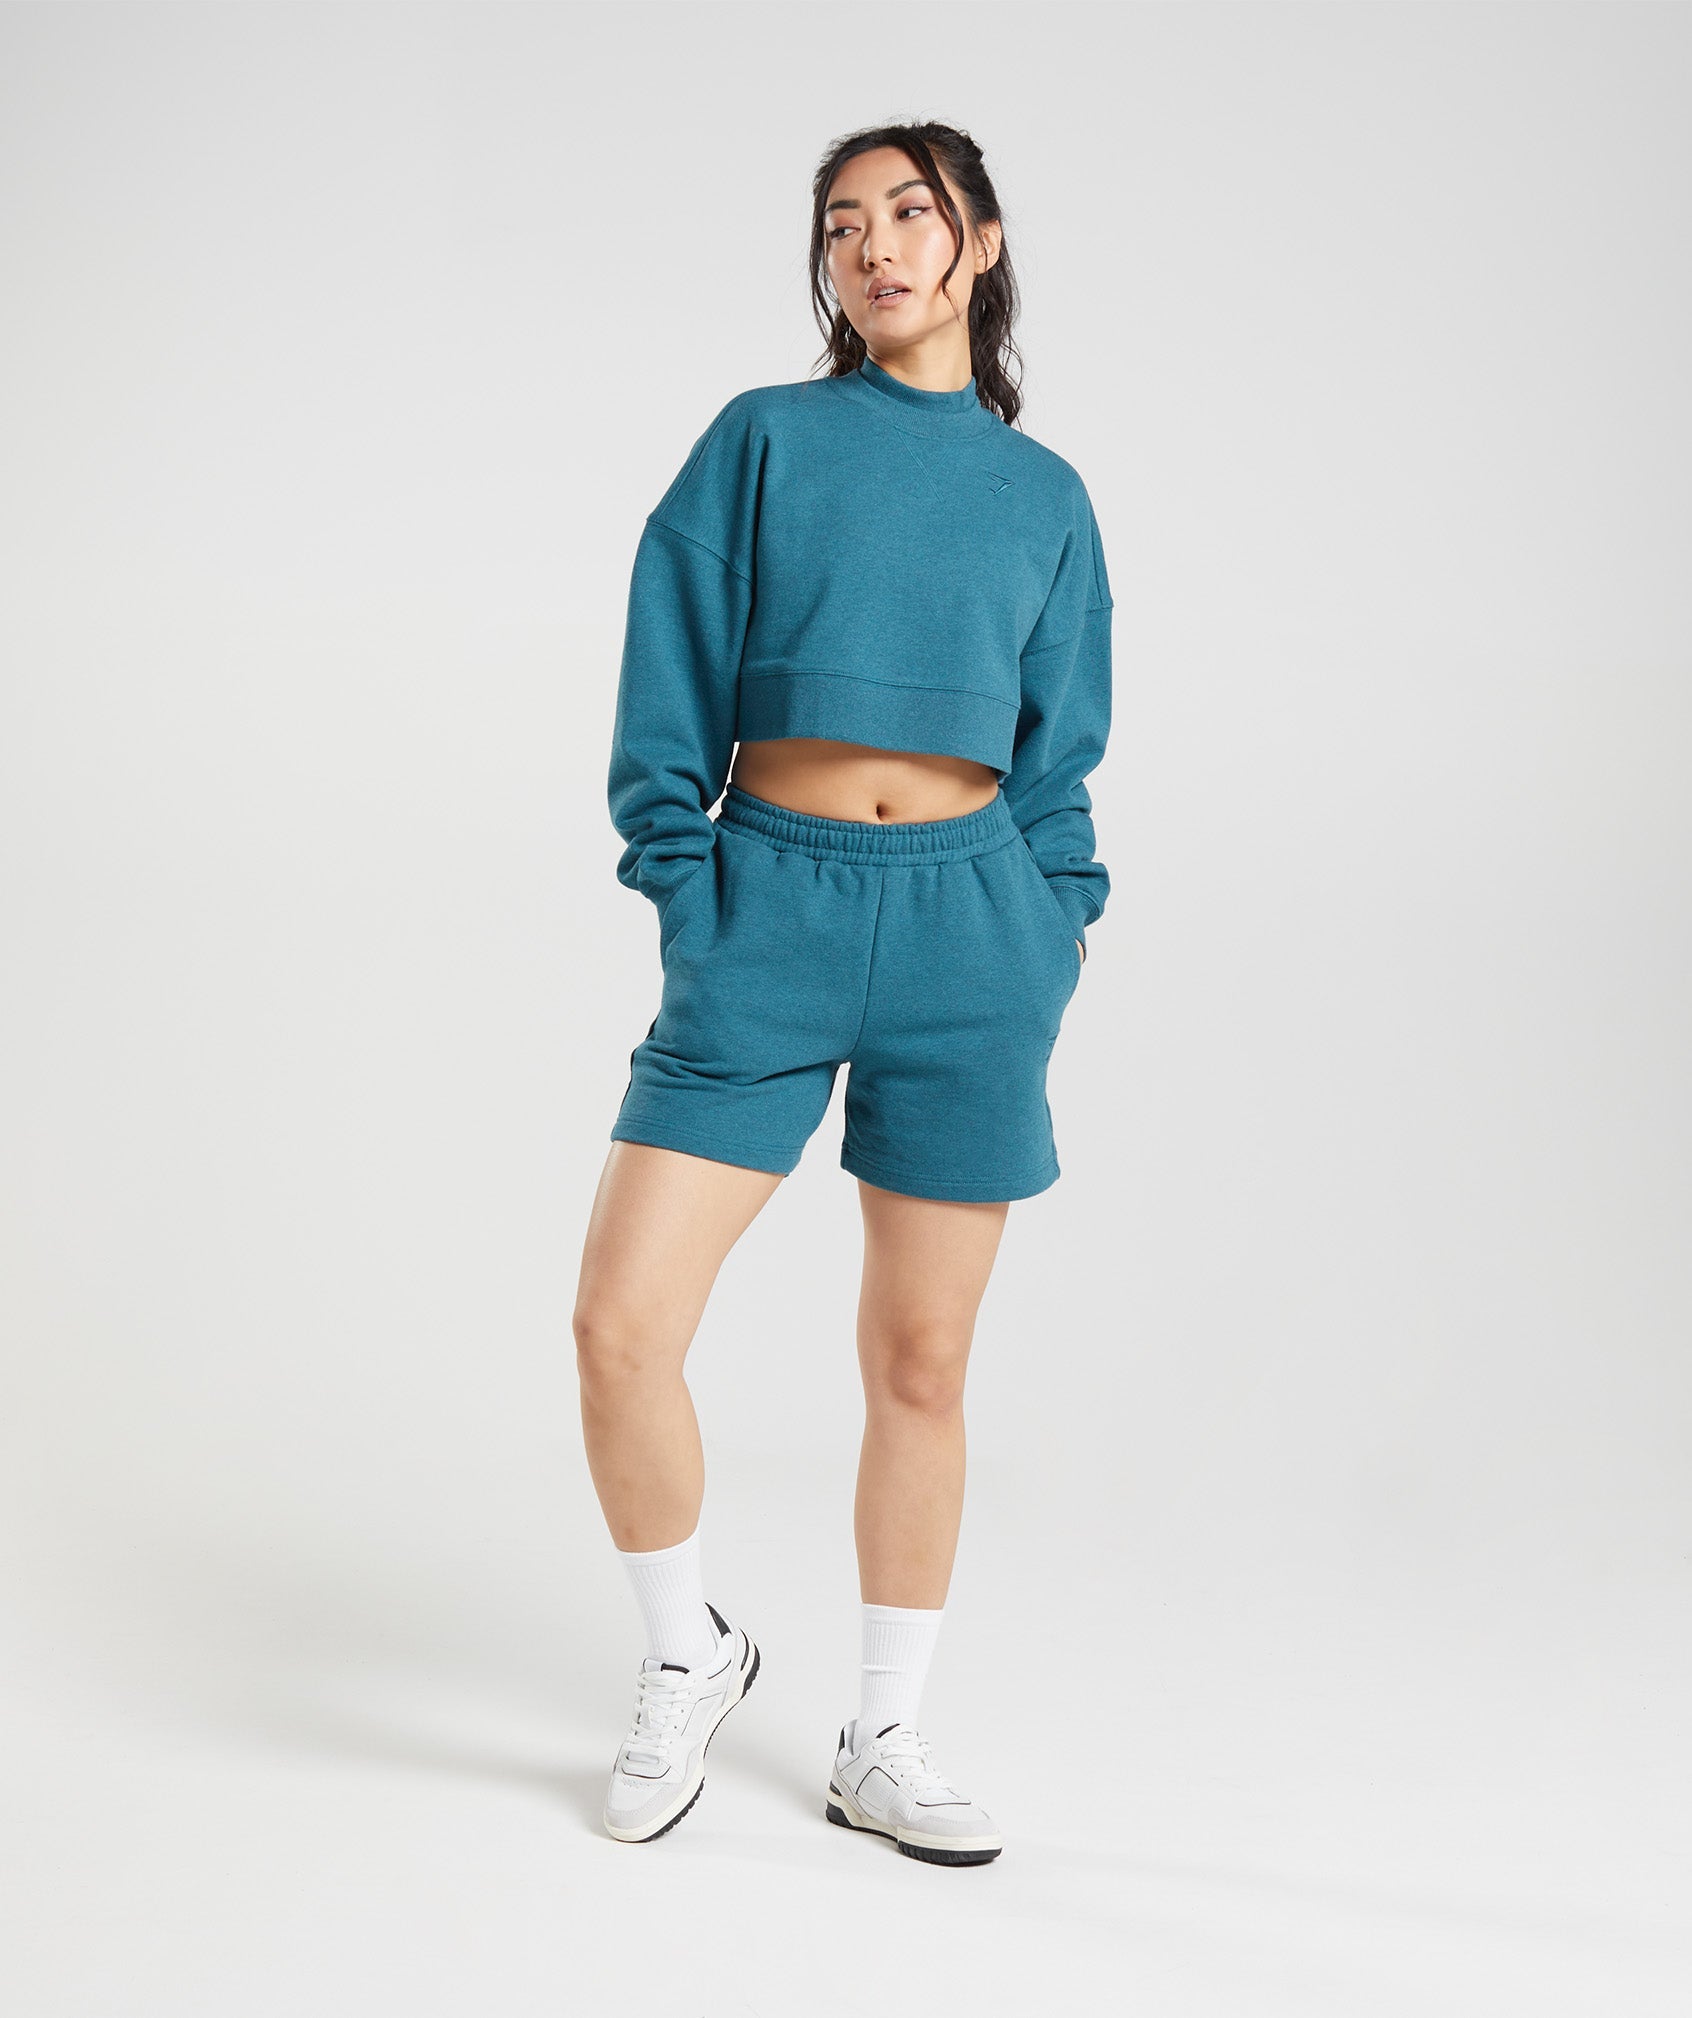 Rest Day Sweats Cropped Pullover in Steel Blue Marl